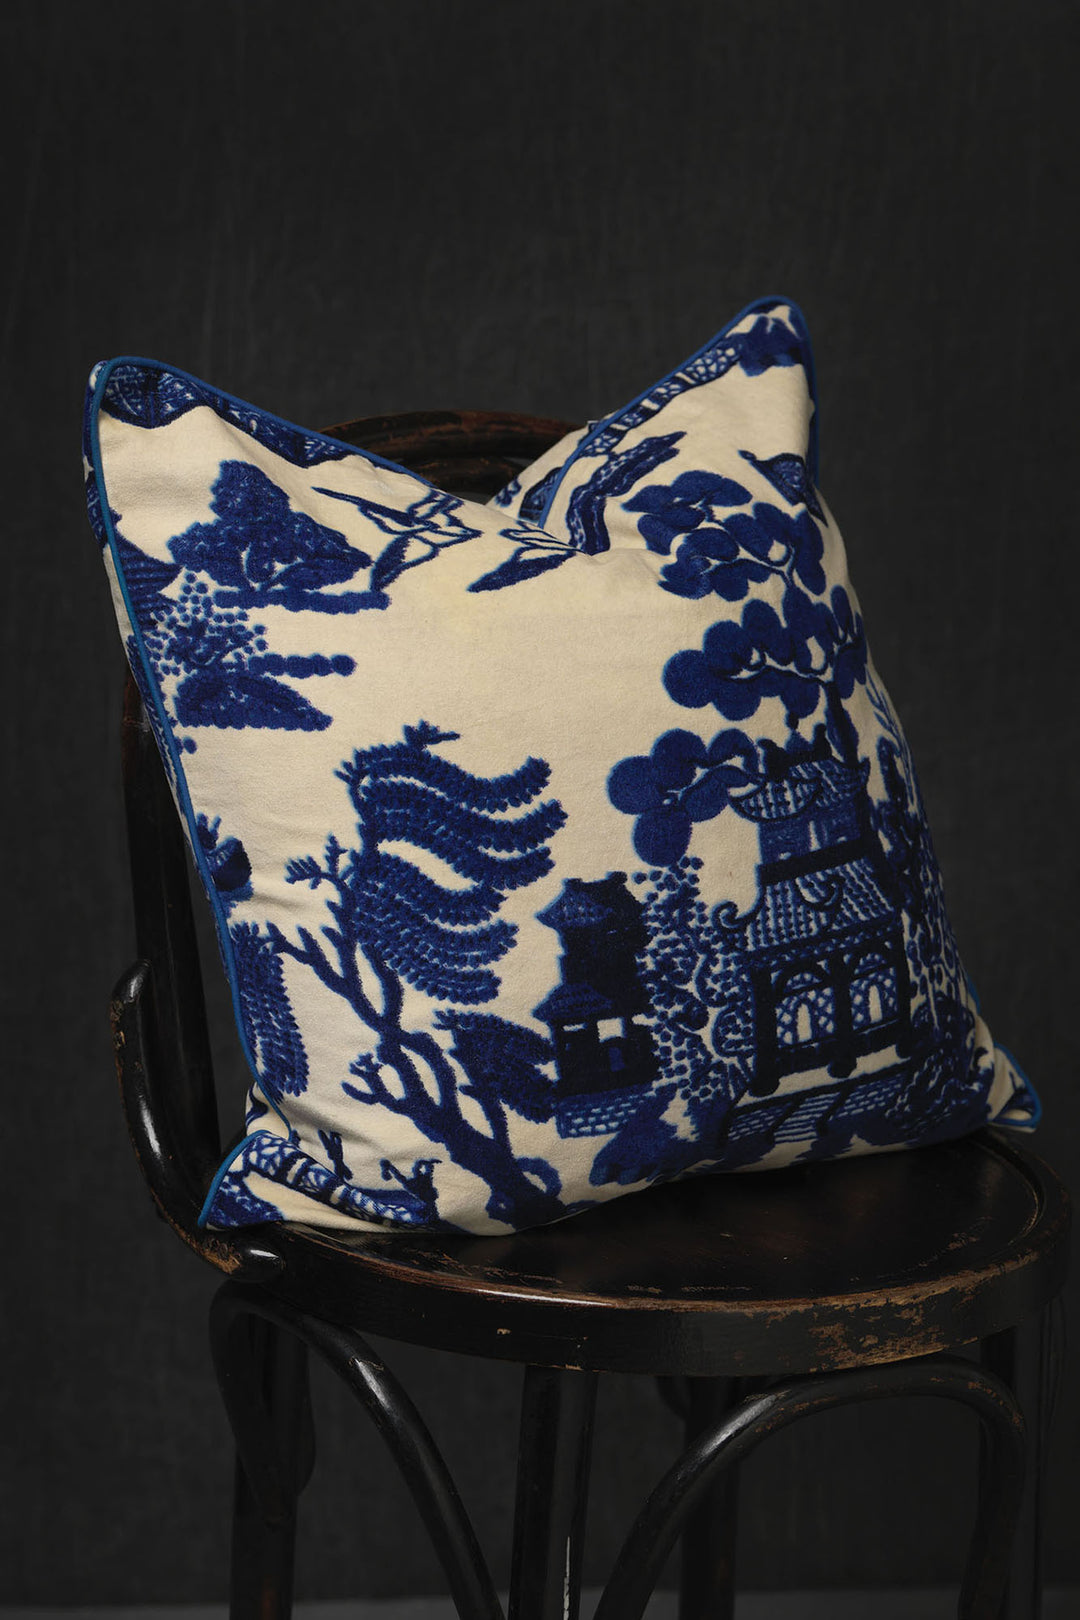 One Hundred Stars Giant Willow Blue Velvet Square Cushion- Our Giant Willow Blue Cushions in velvet are 50 x 50 cm and can be purchased with or without a ethically sourced duck feather inner. 